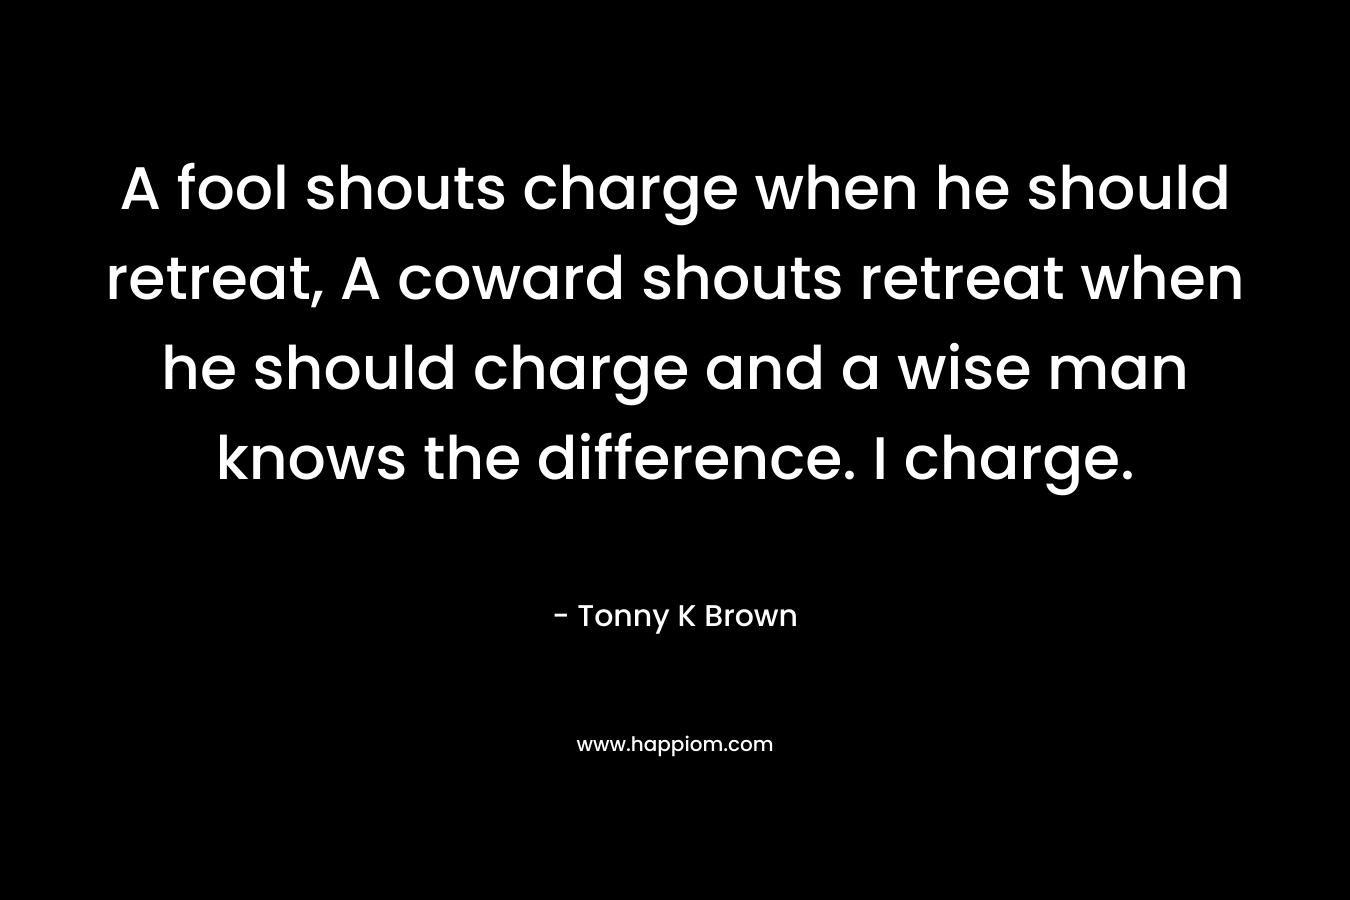 A fool shouts charge when he should retreat, A coward shouts retreat when he should charge and a wise man knows the difference. I charge.